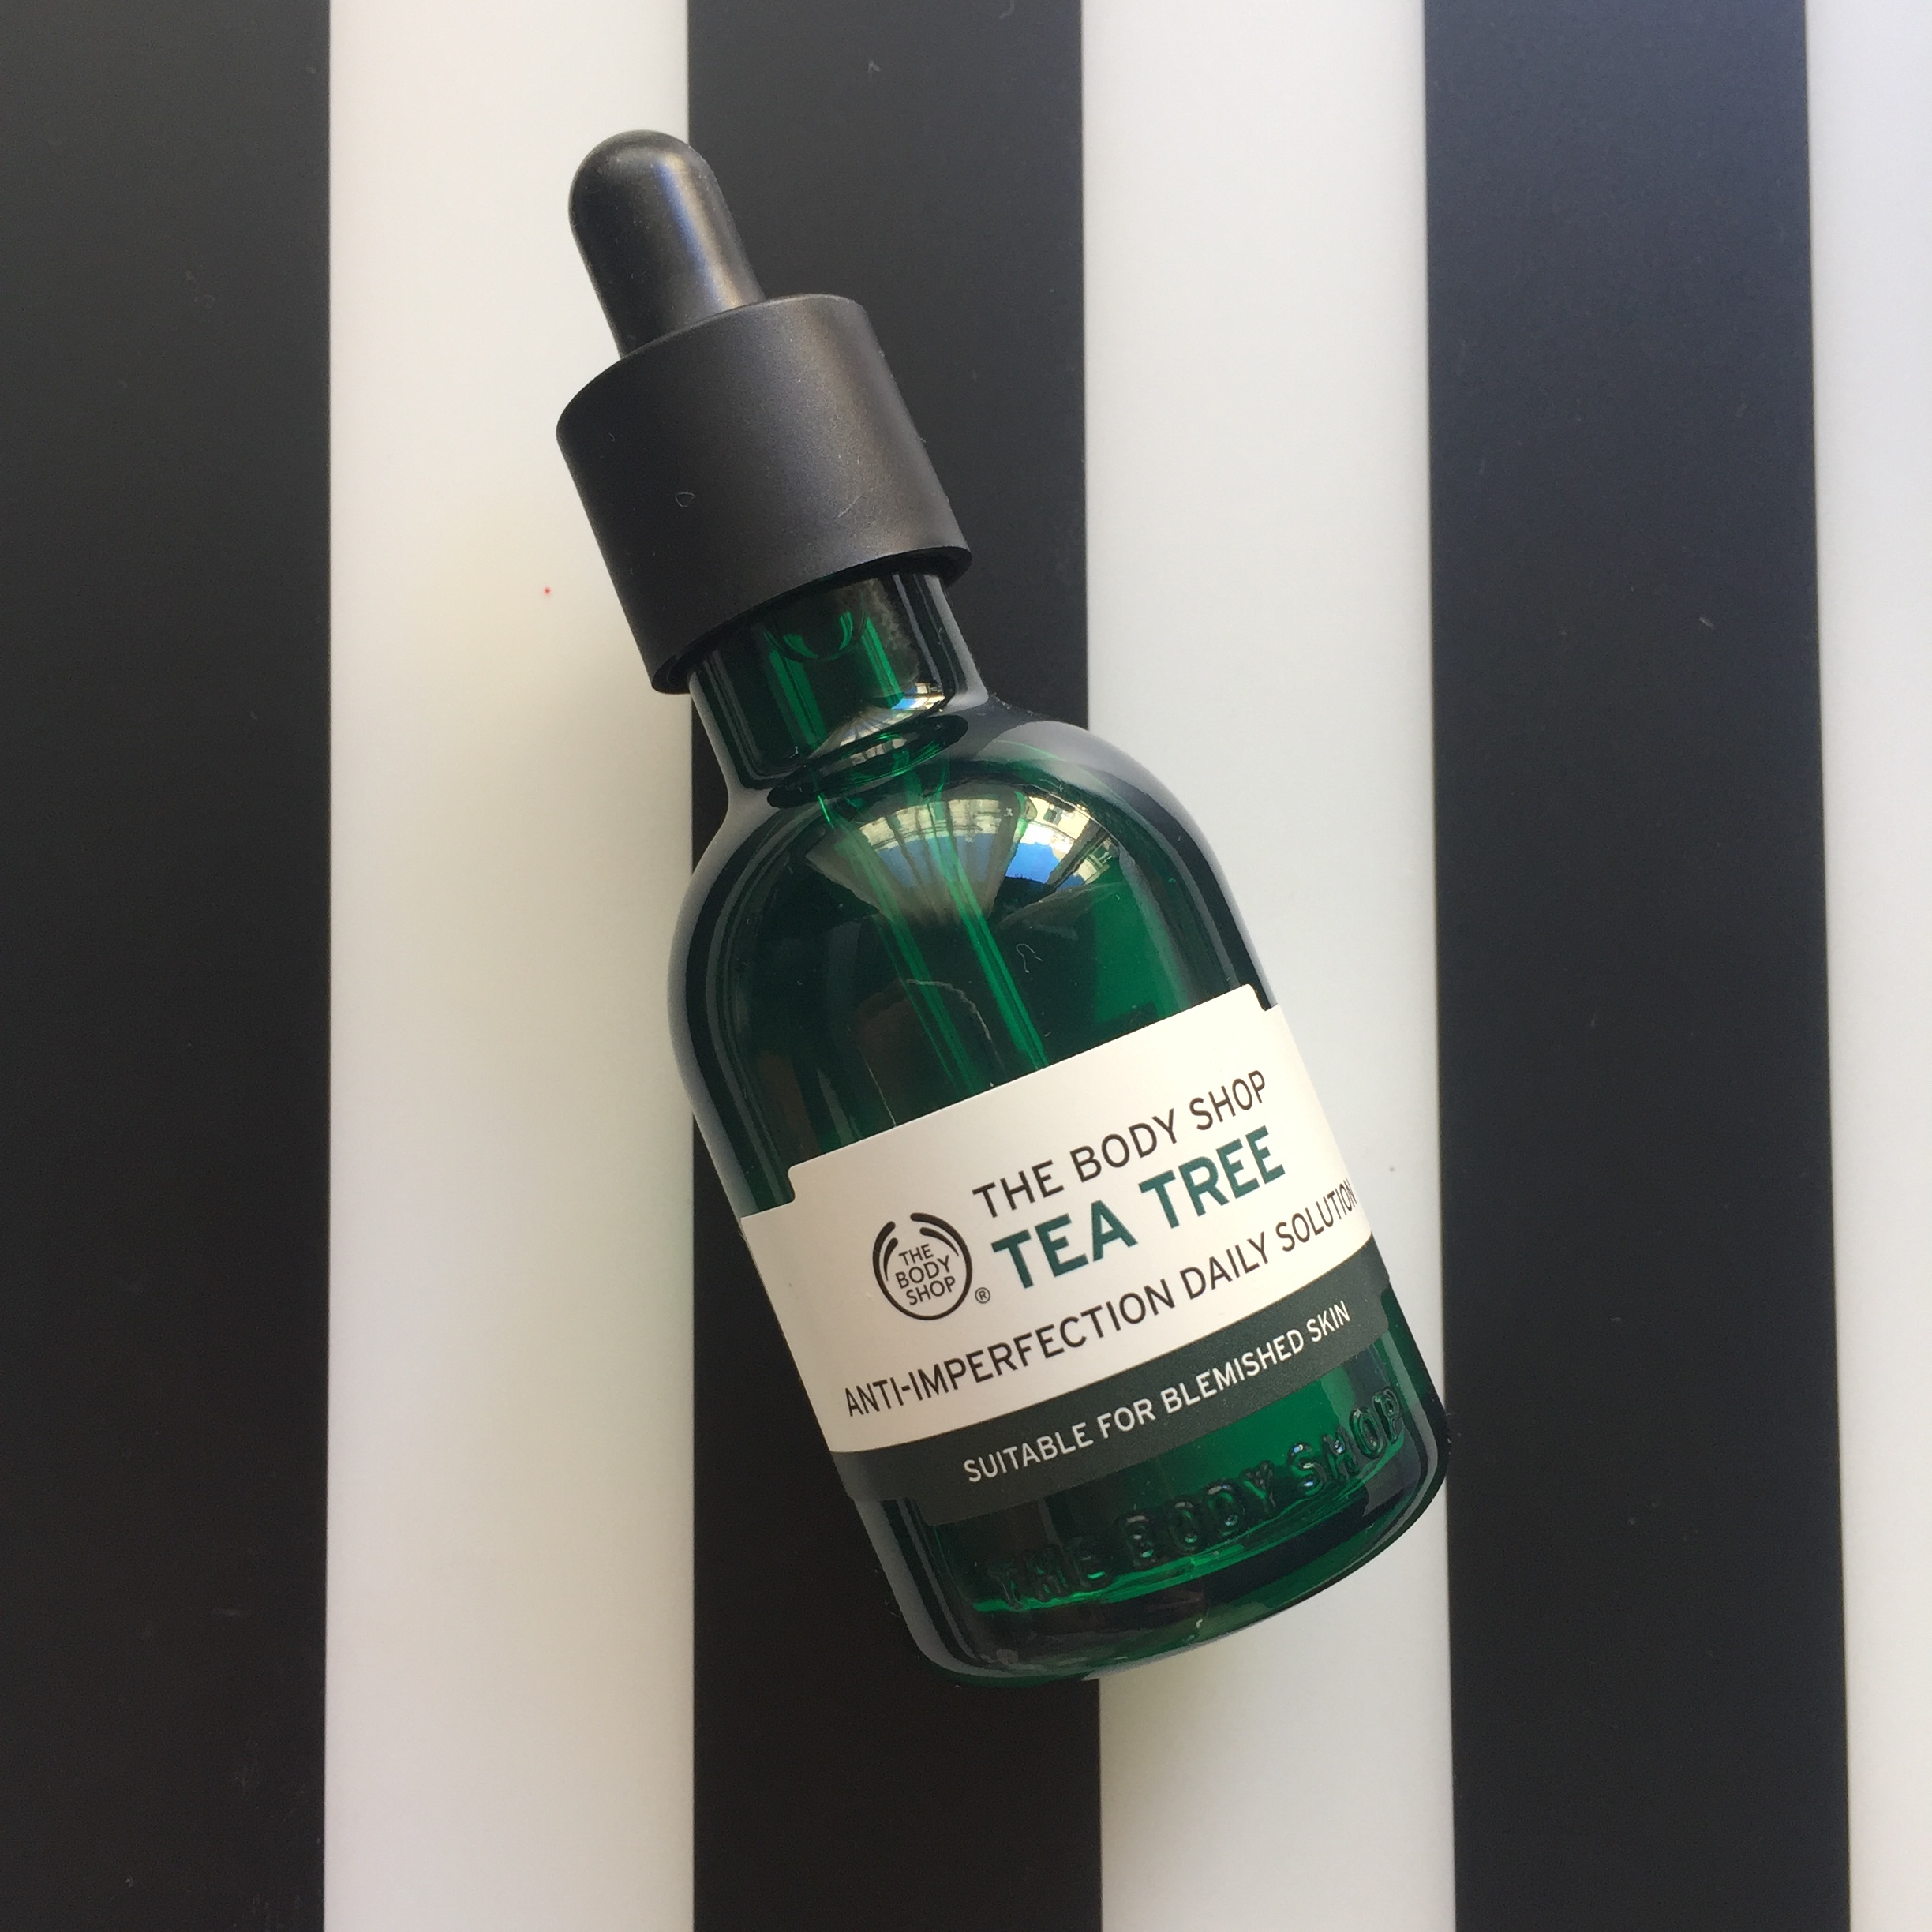 Siero Tea Tree di The Body Shop review di Redhairontheroad